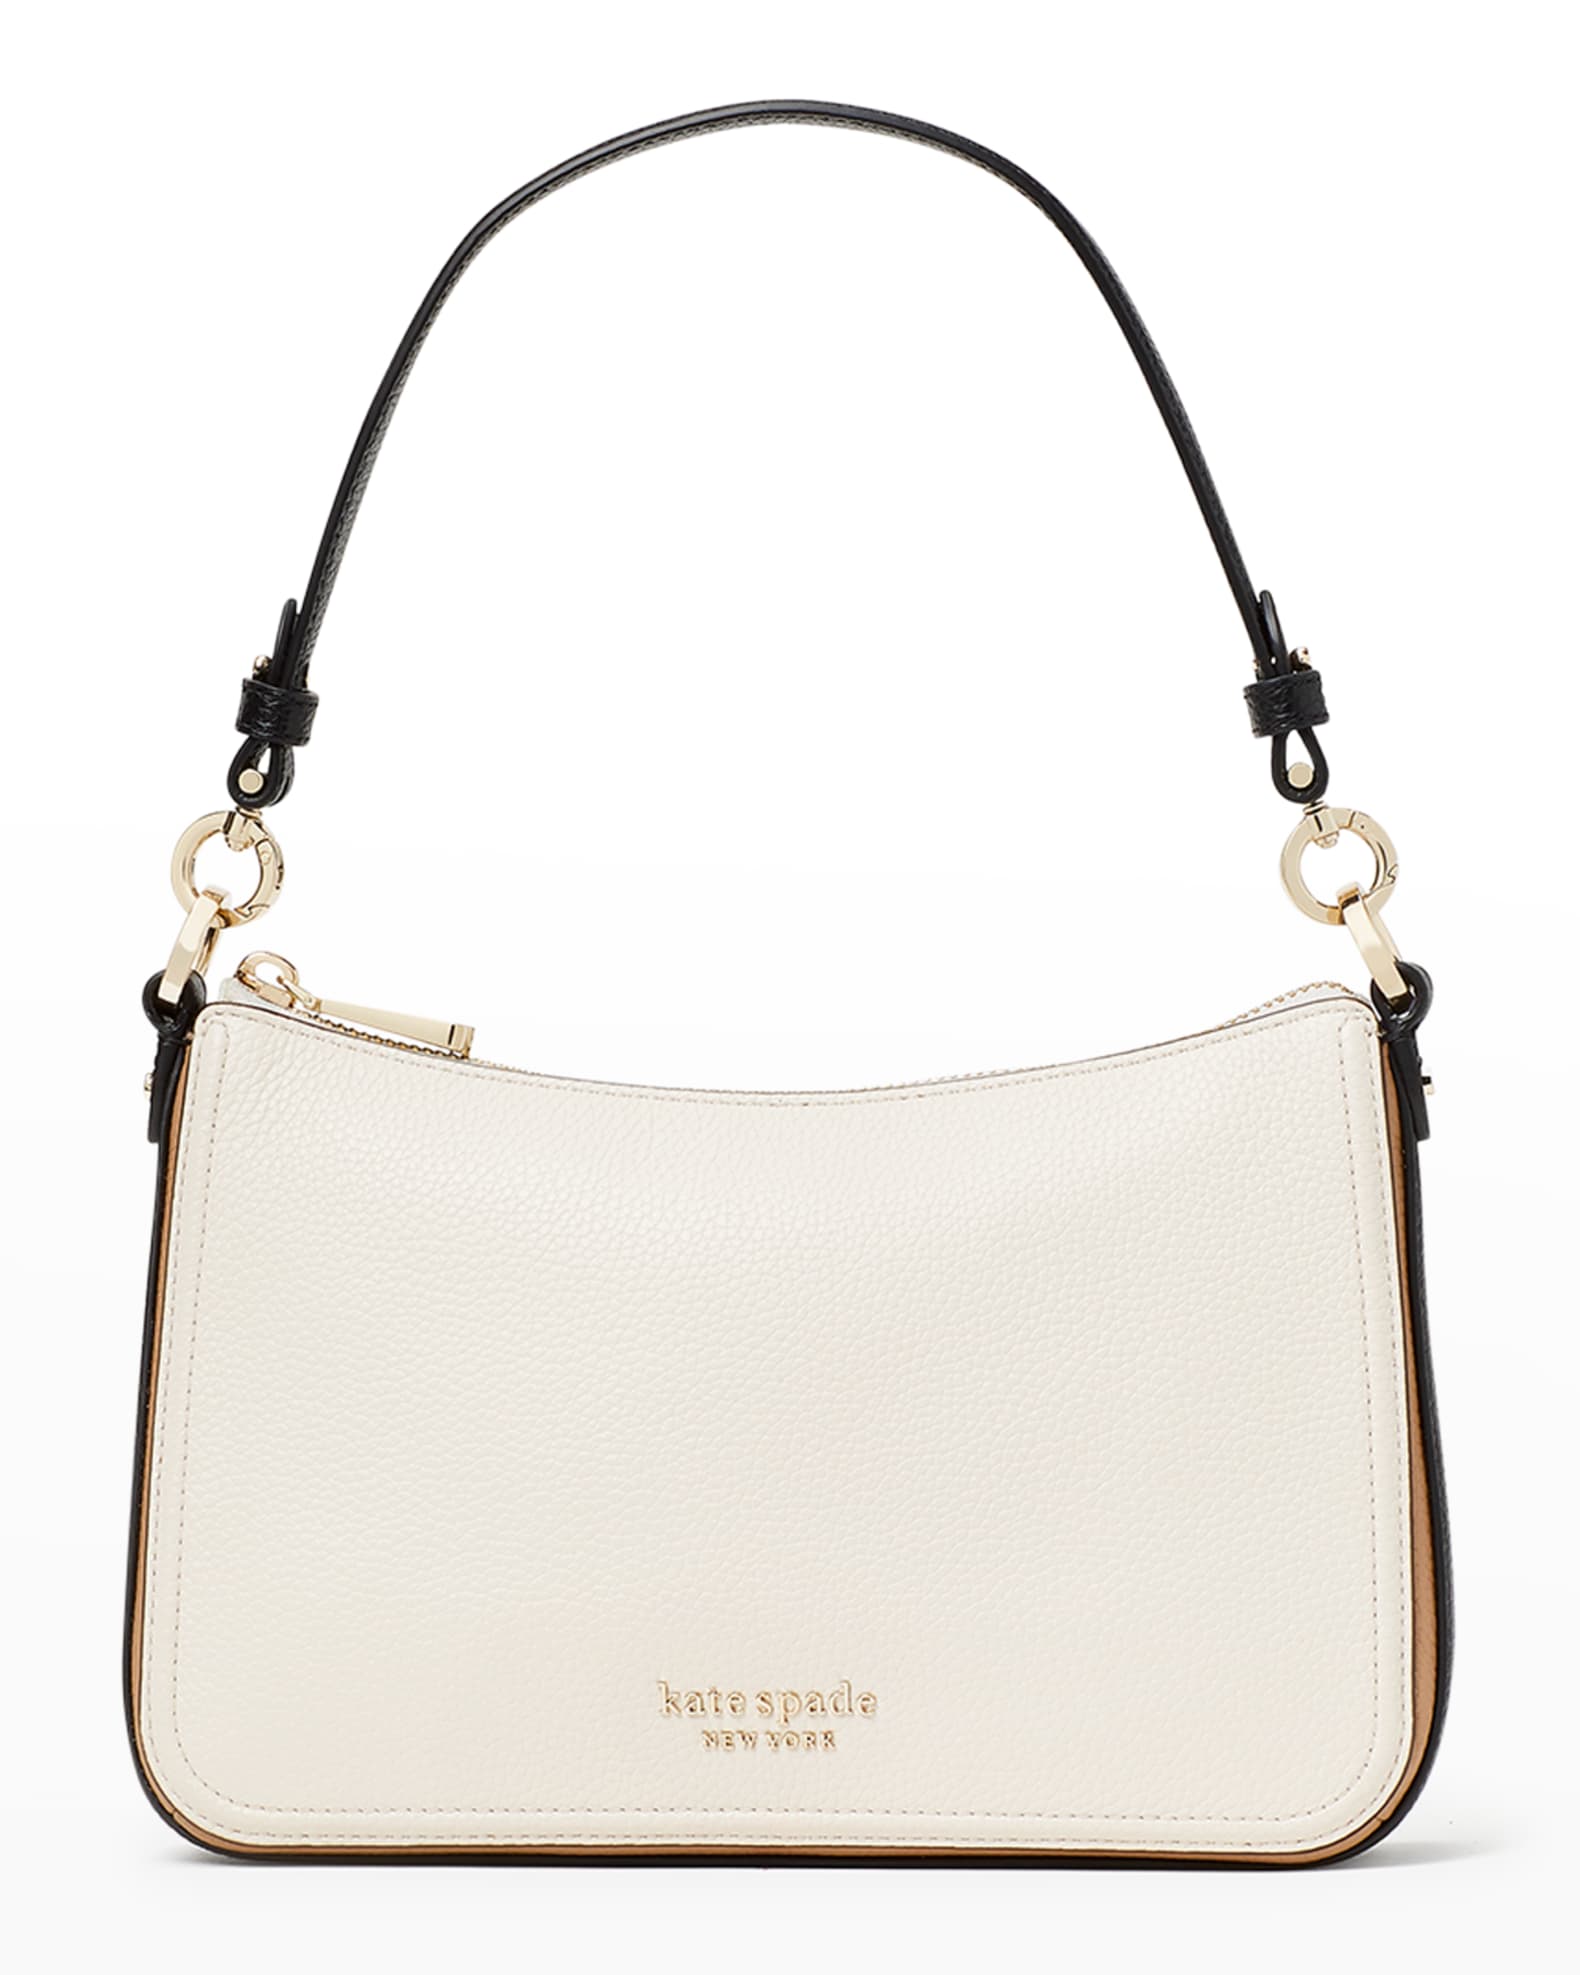 Kate Spade New York Hudson Colorblock Pebbled Leather Convertible Crossbody Bag - Parchment Multi